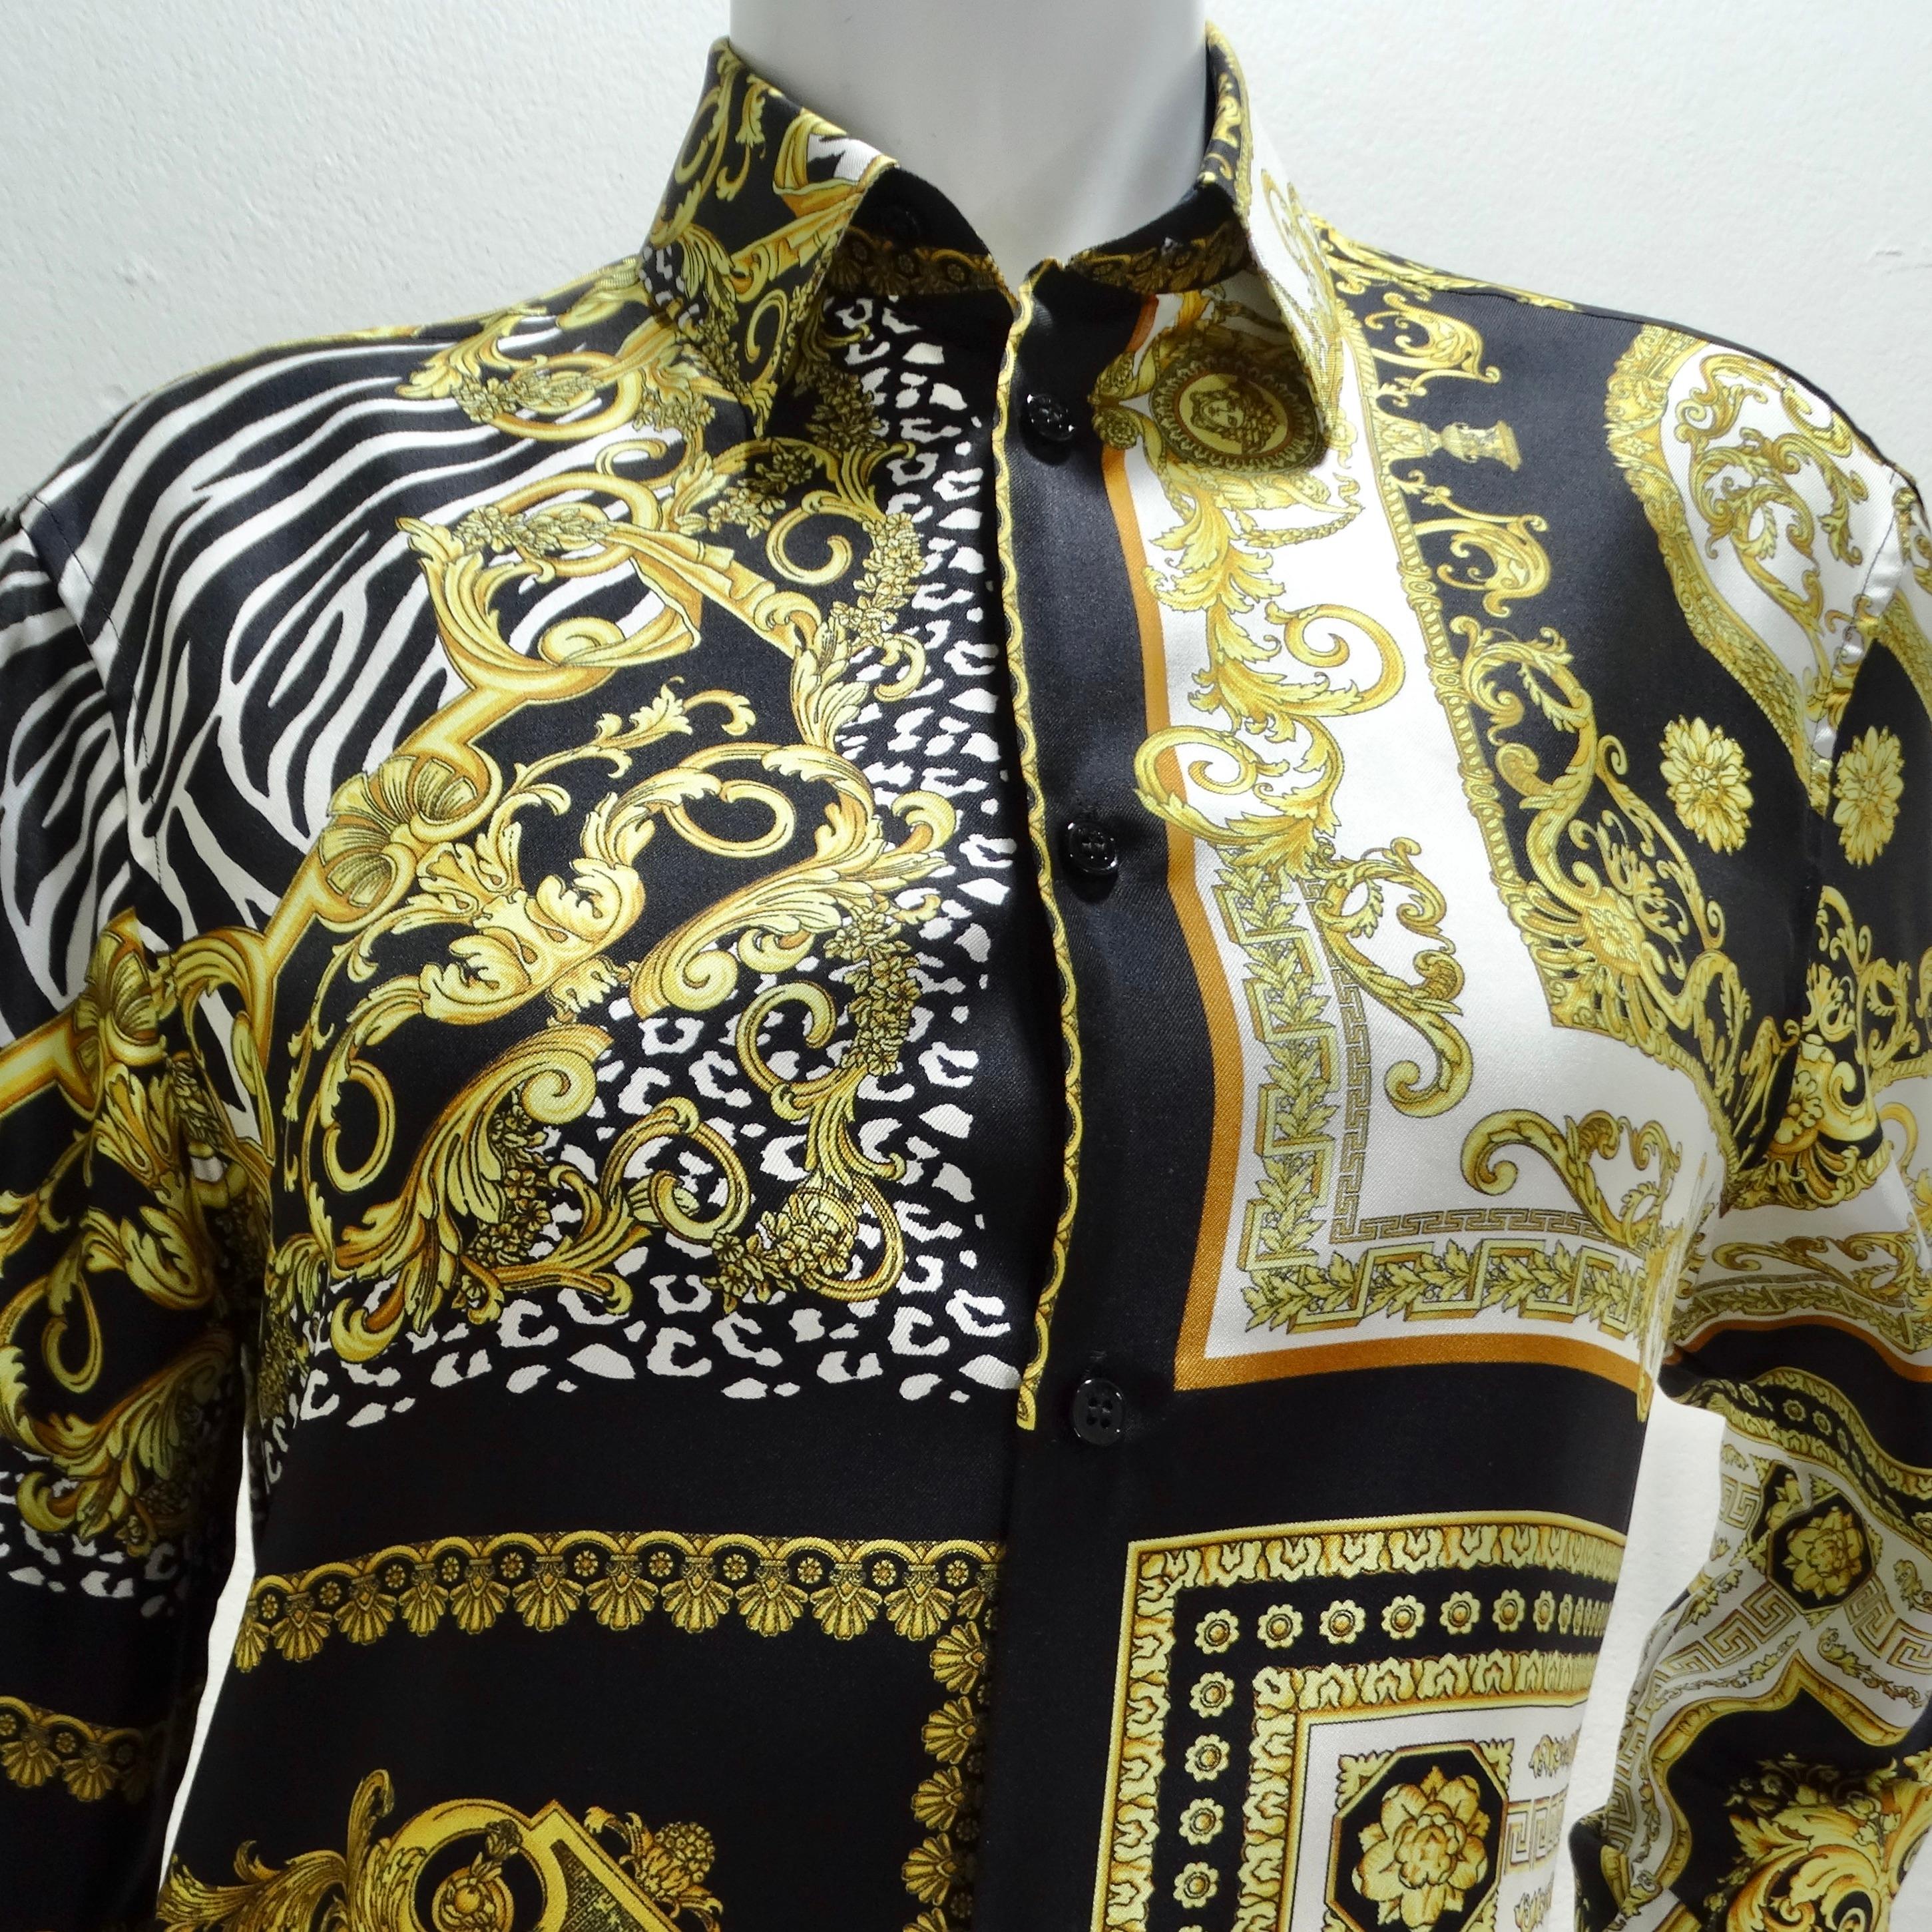 The Versace Silk Baroque Button Up Shirt is a luxurious and statement-making piece that embodies the brand's iconic aesthetic.

Crafted from high-quality silk, this classic collared button-up shirt features a striking signature Versace baroque